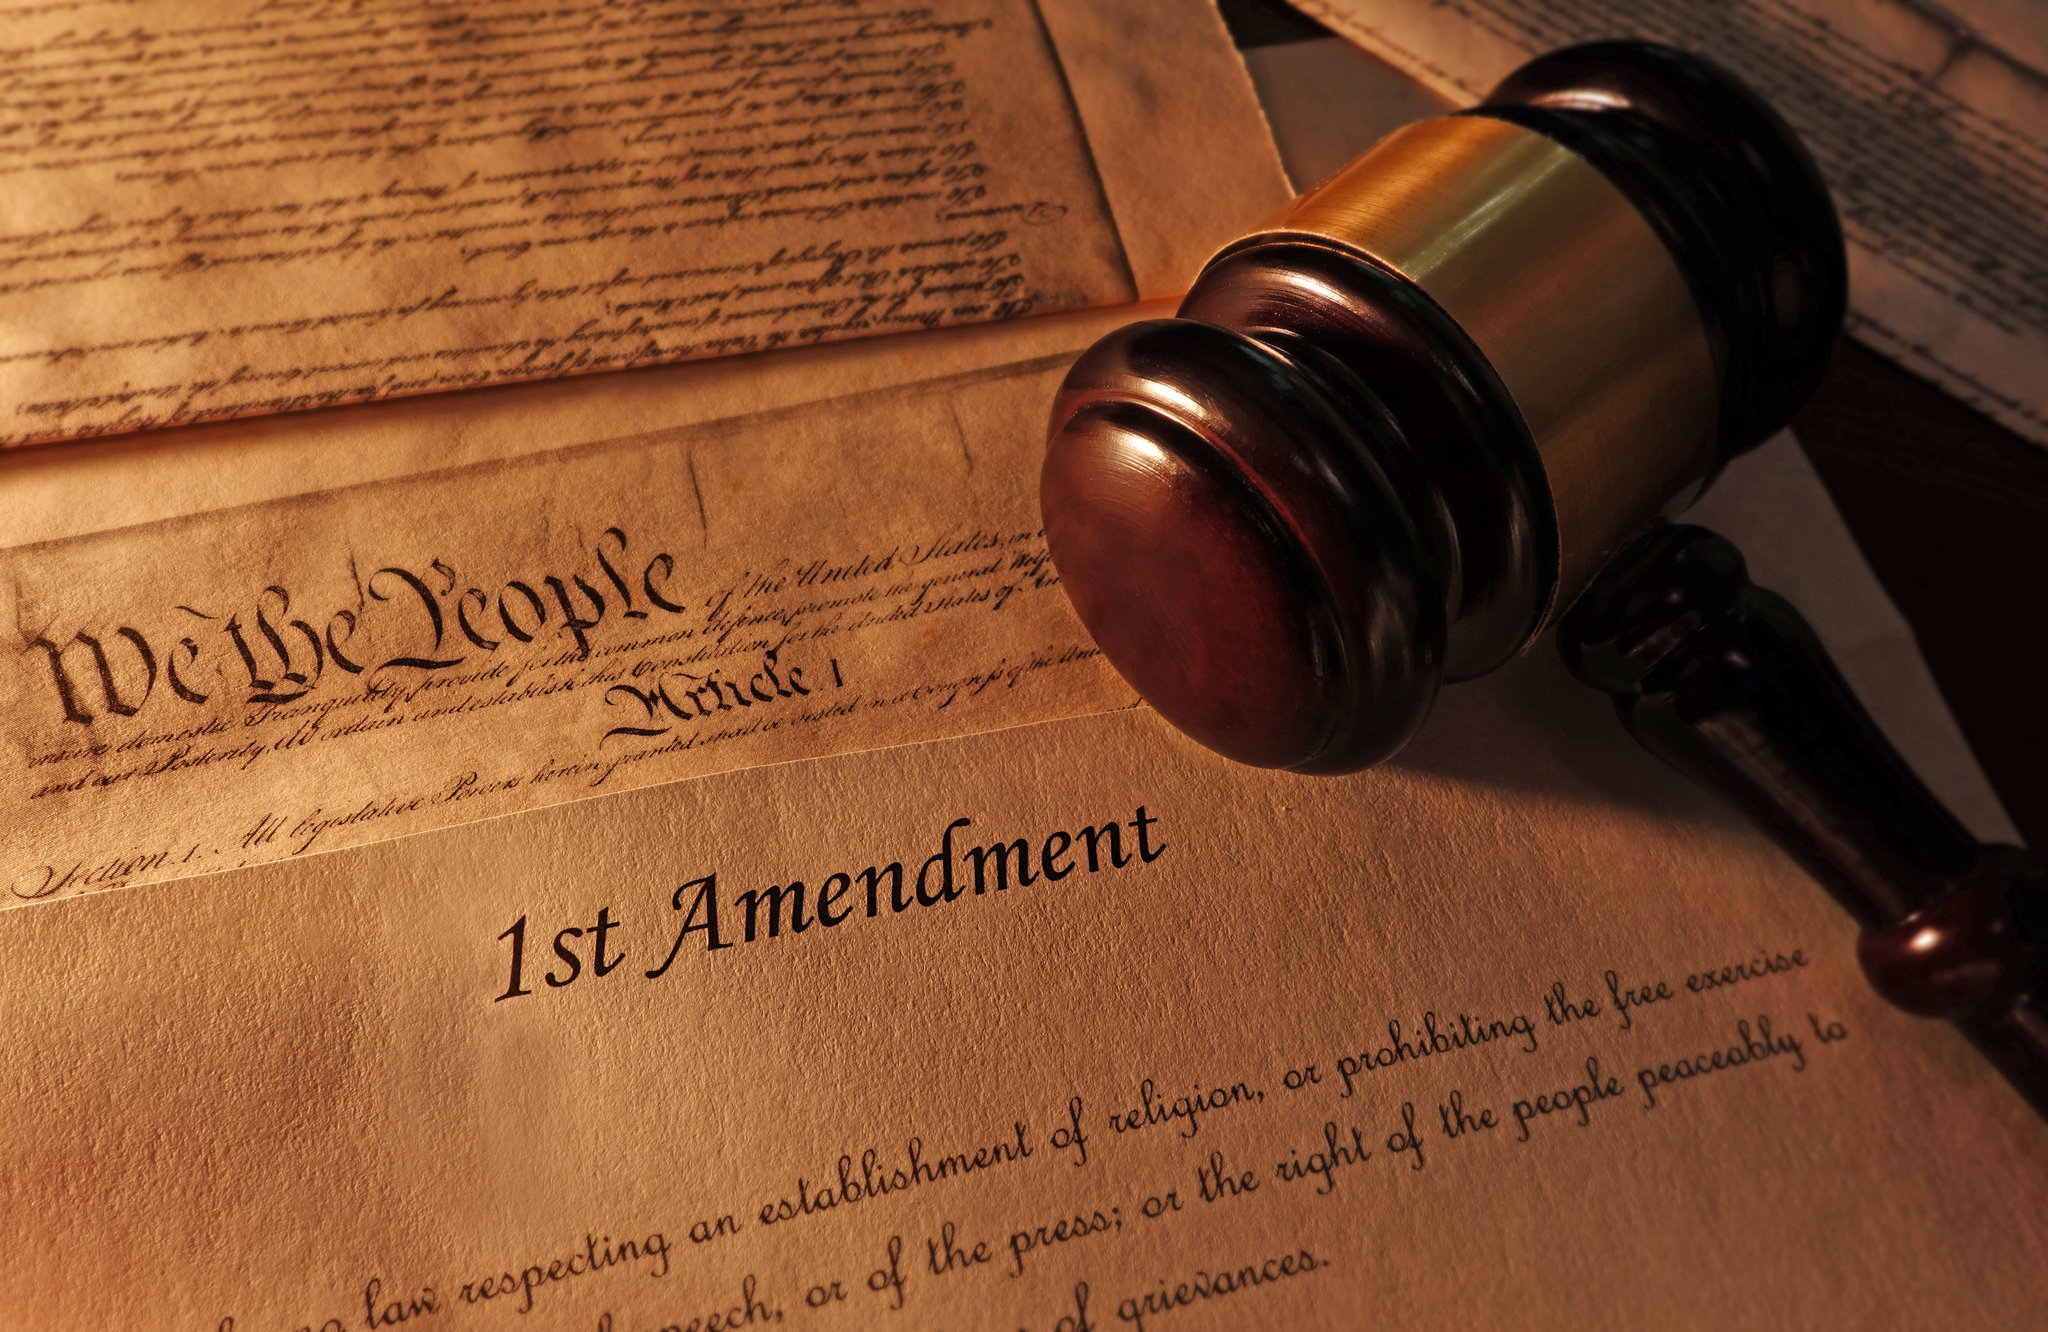 things america got right - first amendment -We the Veople Minde 1st Amendment ot law respecting an establishment of religion, o prohibiting the free exercise ech, or of the presa; or the right of the people peaceably is d grievances.